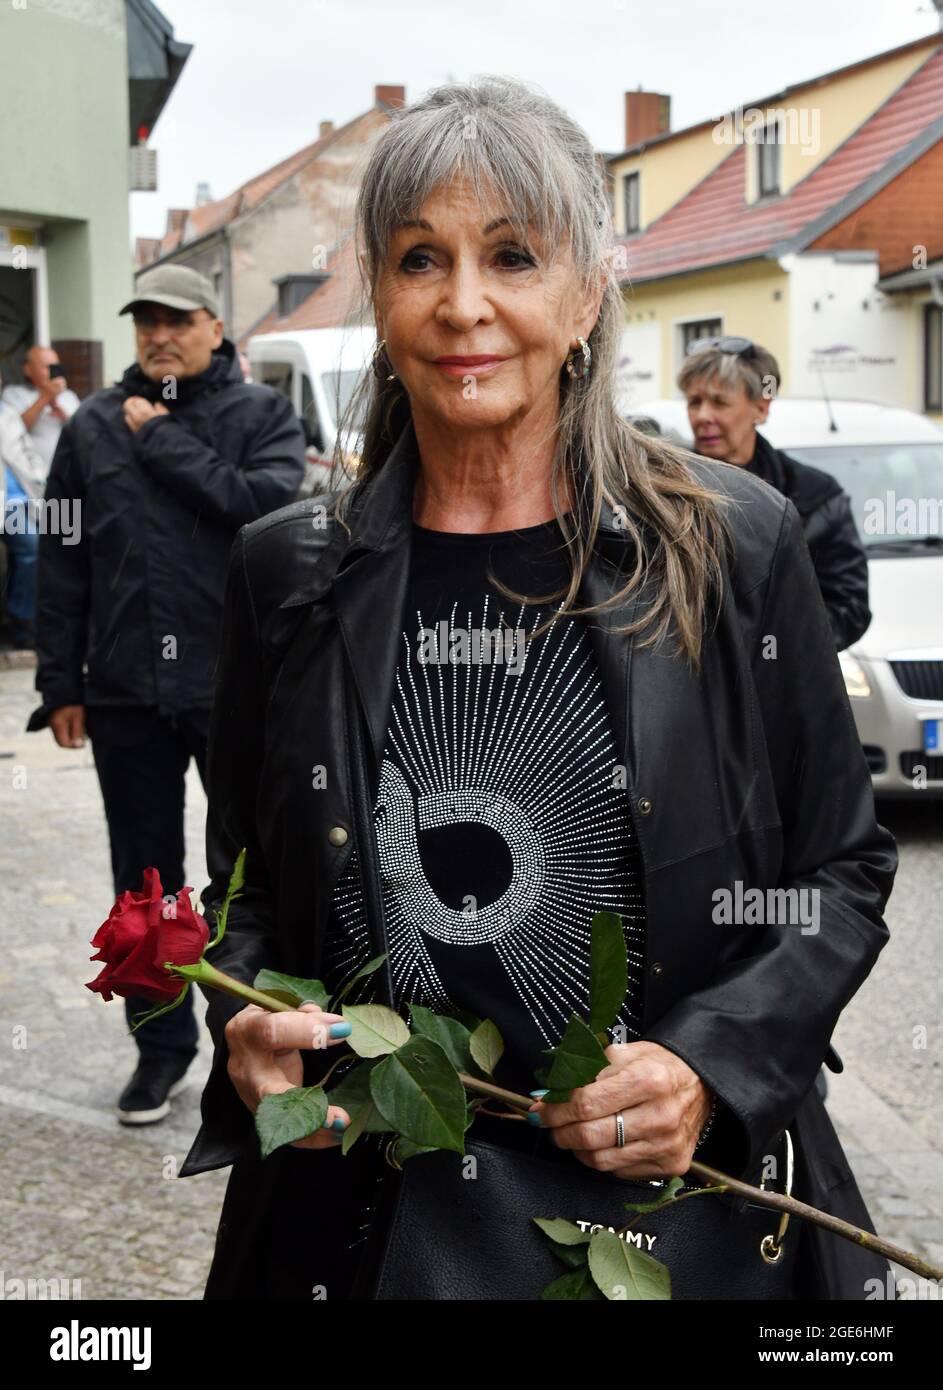 17 August 2021, Brandenburg, Beelitz: With a rose, the actress Uta Schorn comes to the funeral service for Herbert Köfer. The actor died on July 24 at the age of 100. He will be buried in Beelitz. For the fans there will be another funeral service on August 27. Photo: Bernd Settnik/dpa Stock Photo